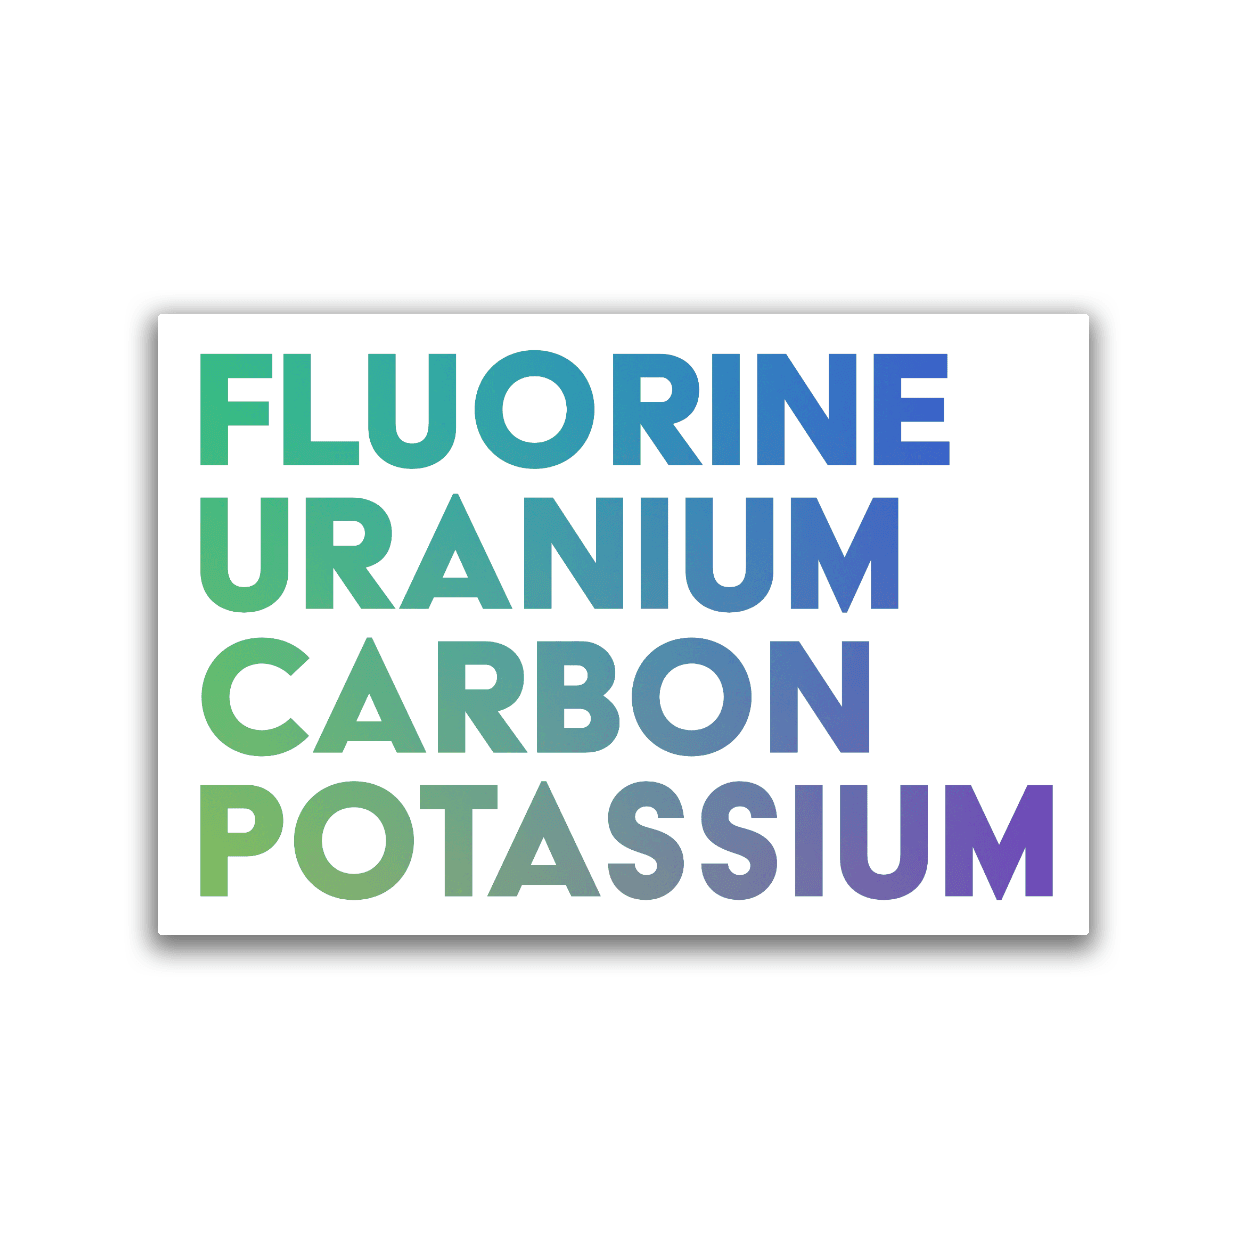 2x3 colorful magnet with words of the elements: Fluorine, Uranium, Carbon, and Potassium